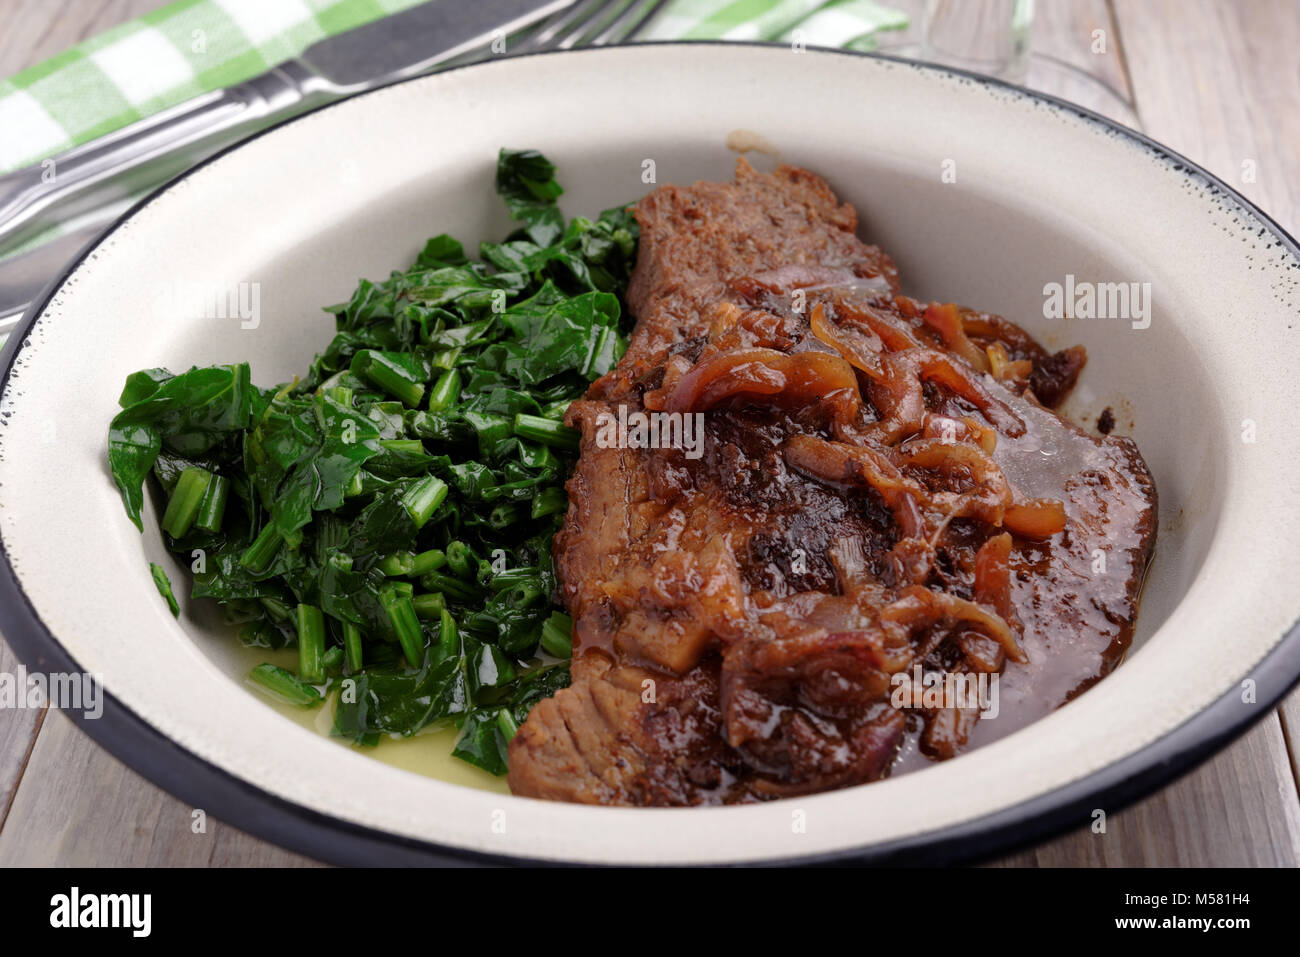 Beef steak with onion and spinach on a rustic table Stock Photo